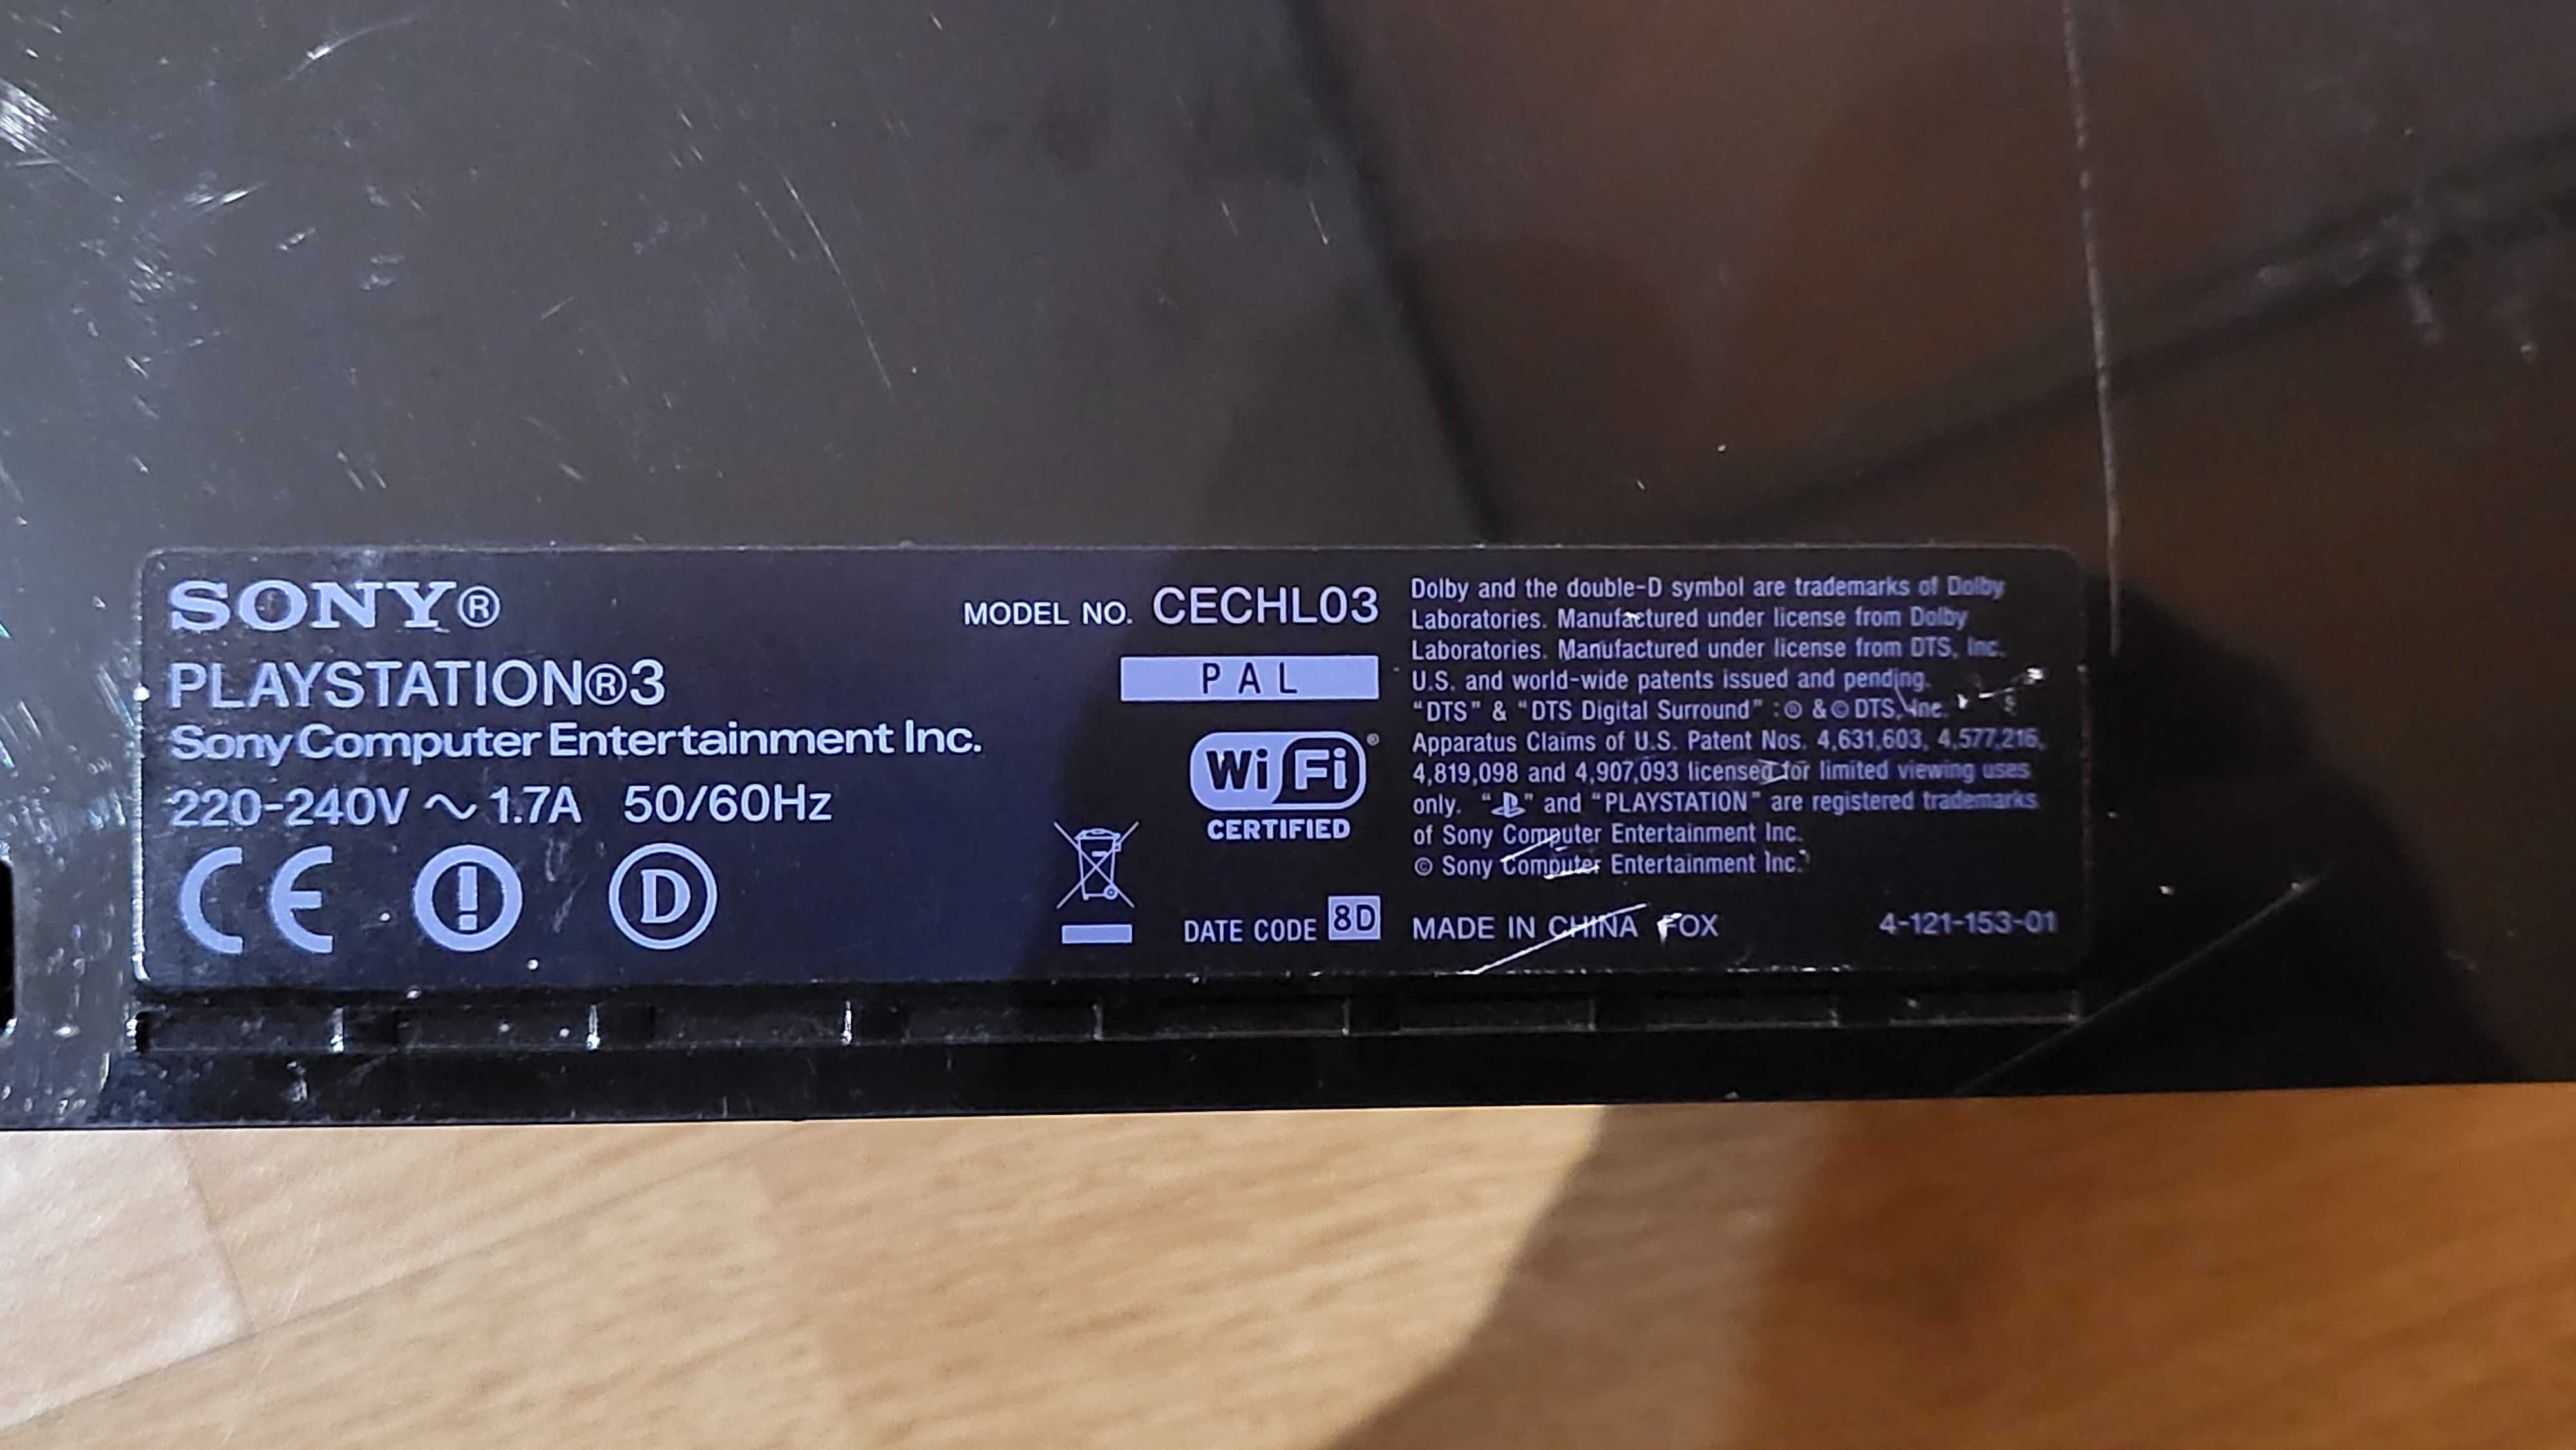 PS3 CECHL03 80GB SSD, Evilnat 4.91, nowy pad